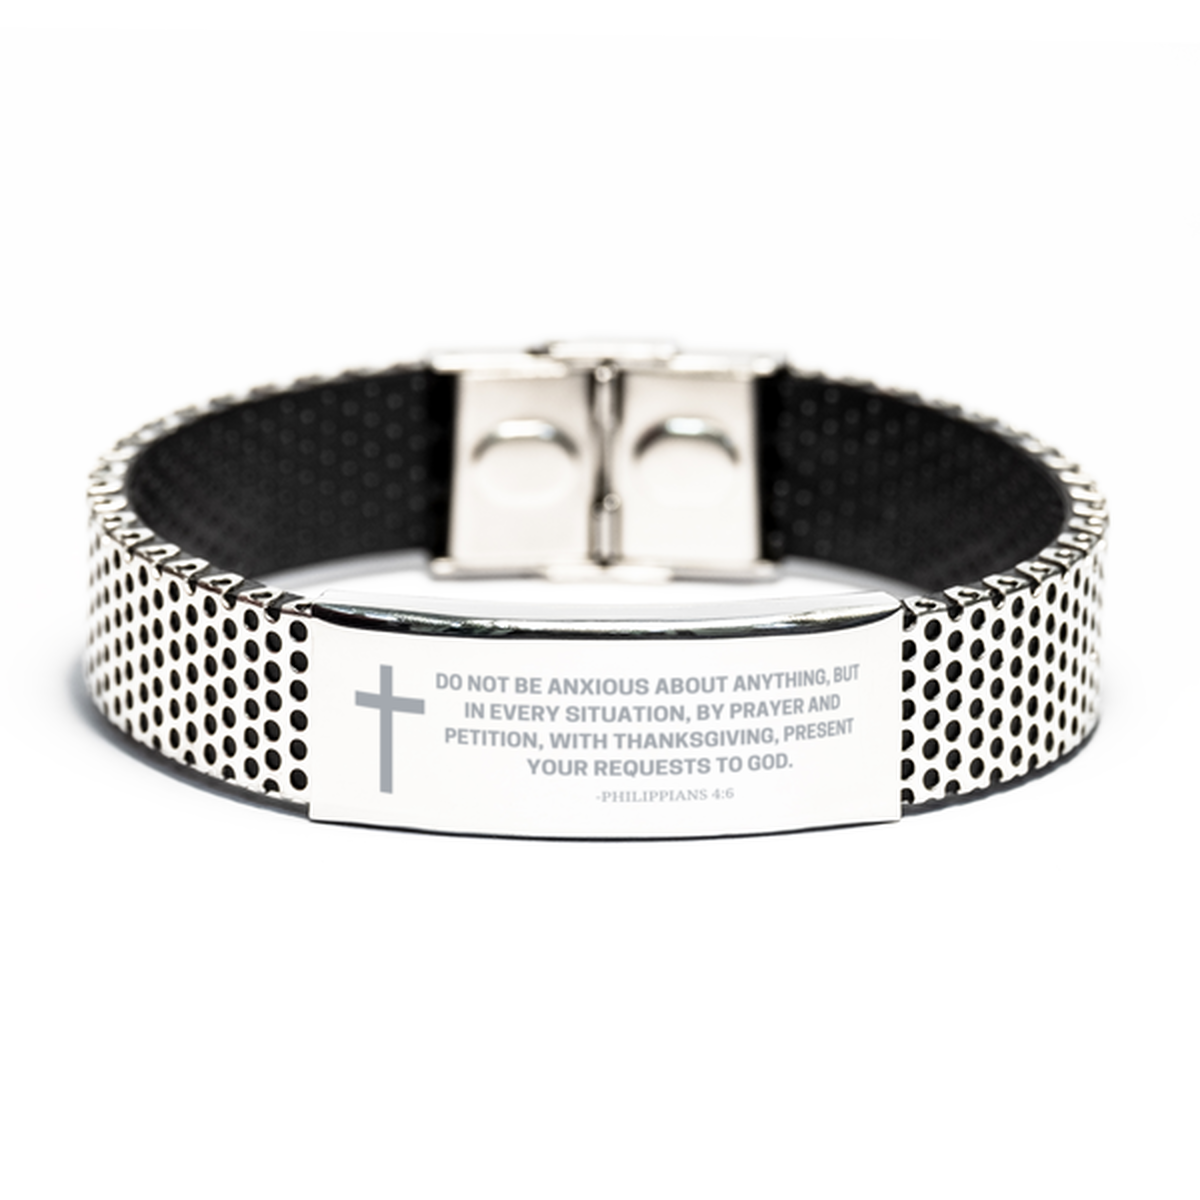 Baptism Gifts For Teenage Boys Girls, Christian Bible Verse Stainless Steel Bracelet, Do not be anxious about anything, Catholic Confirmation Gifts for Son, Godson, Grandson, Nephew